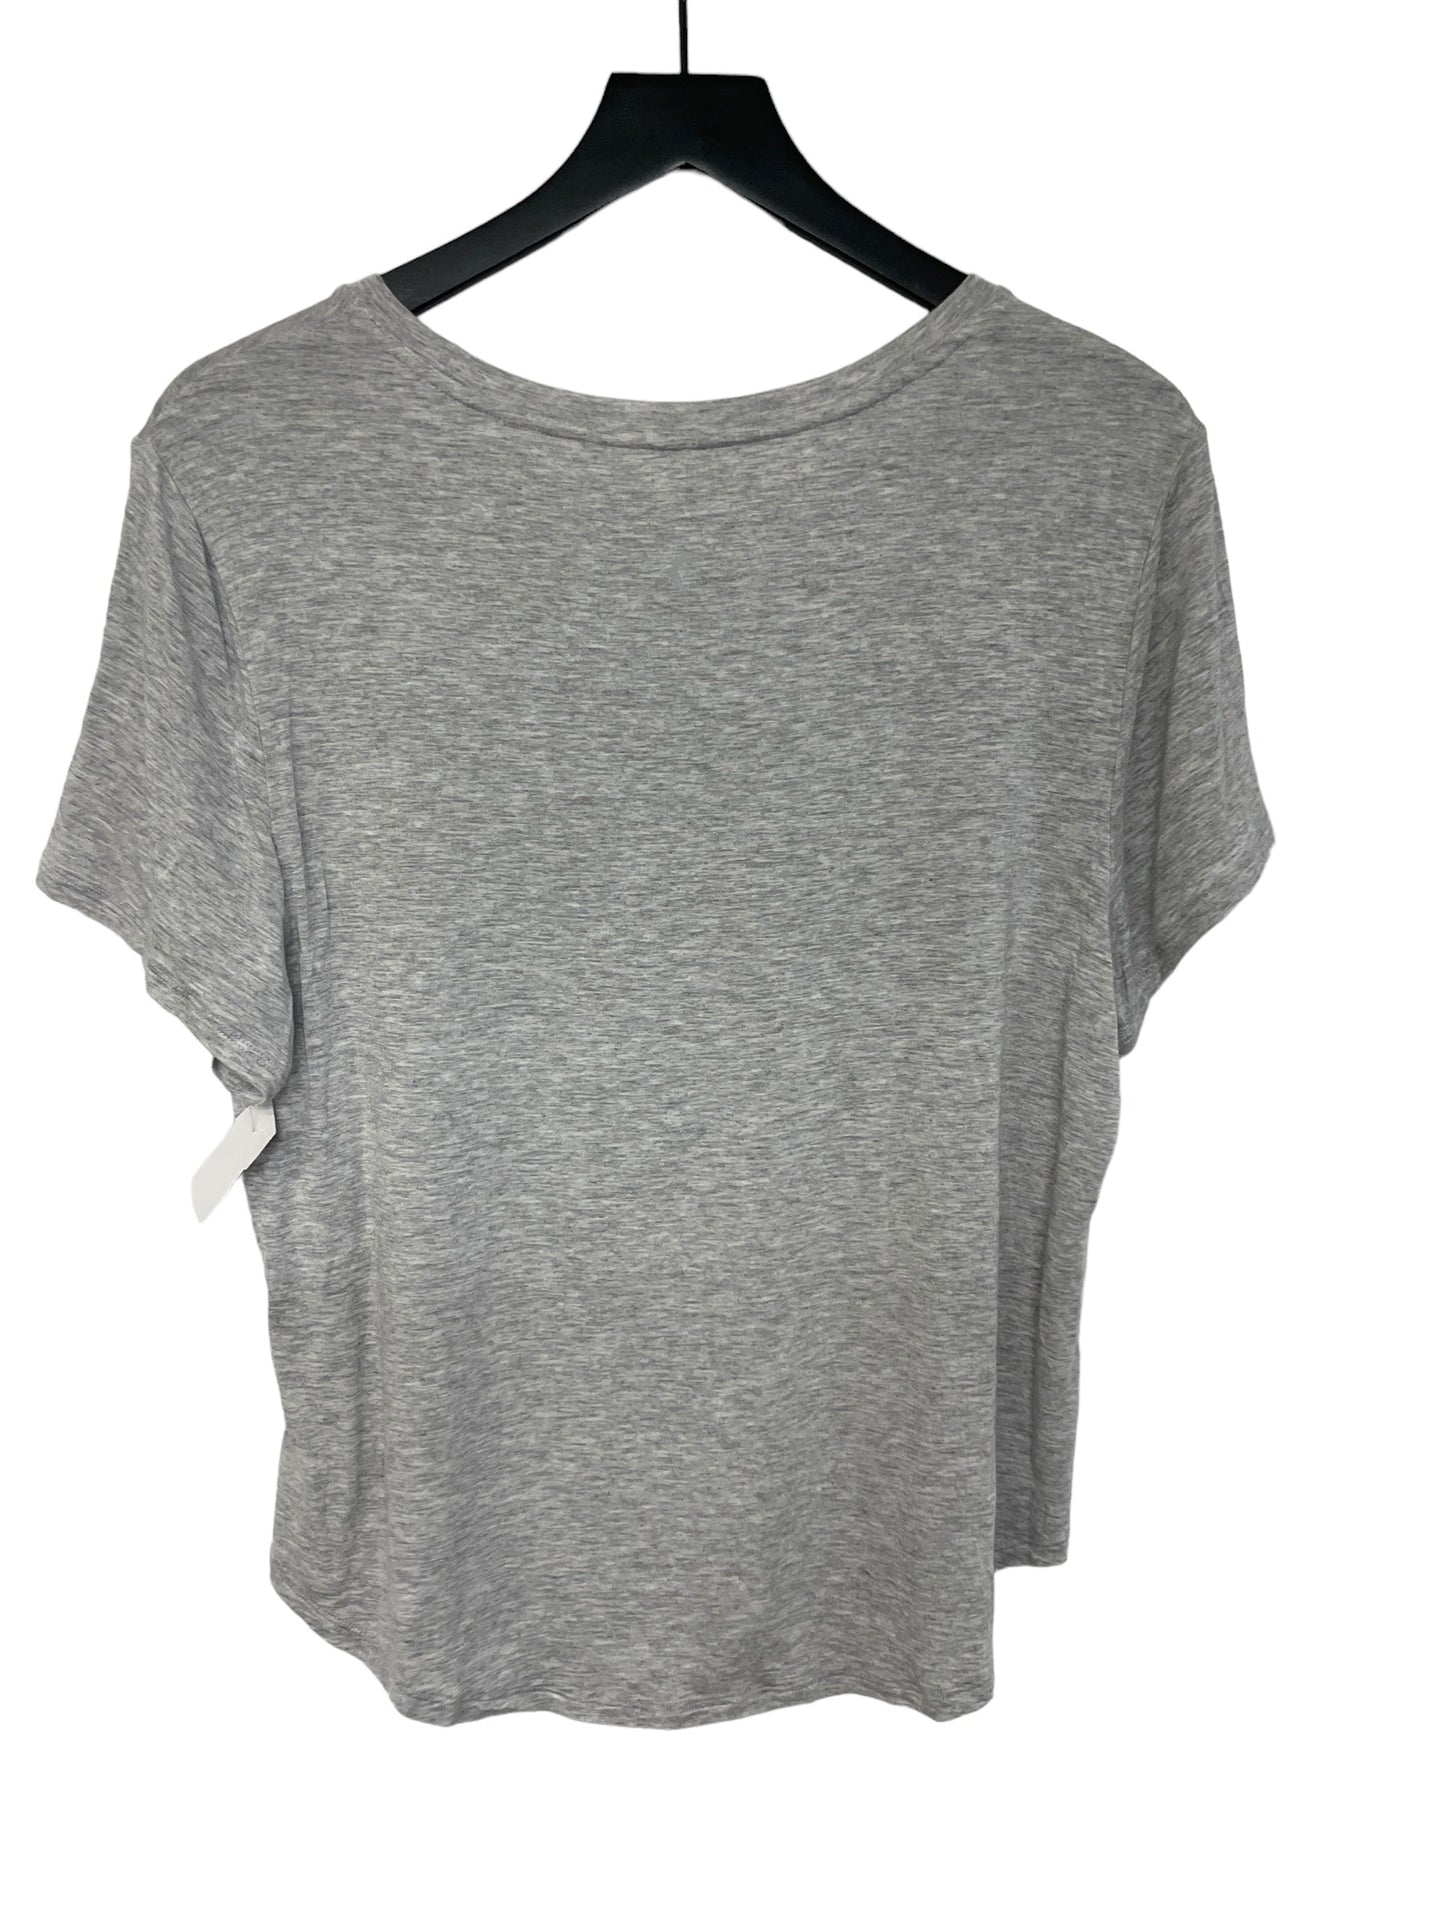 Grey Athletic Top Short Sleeve Zyia, Size L